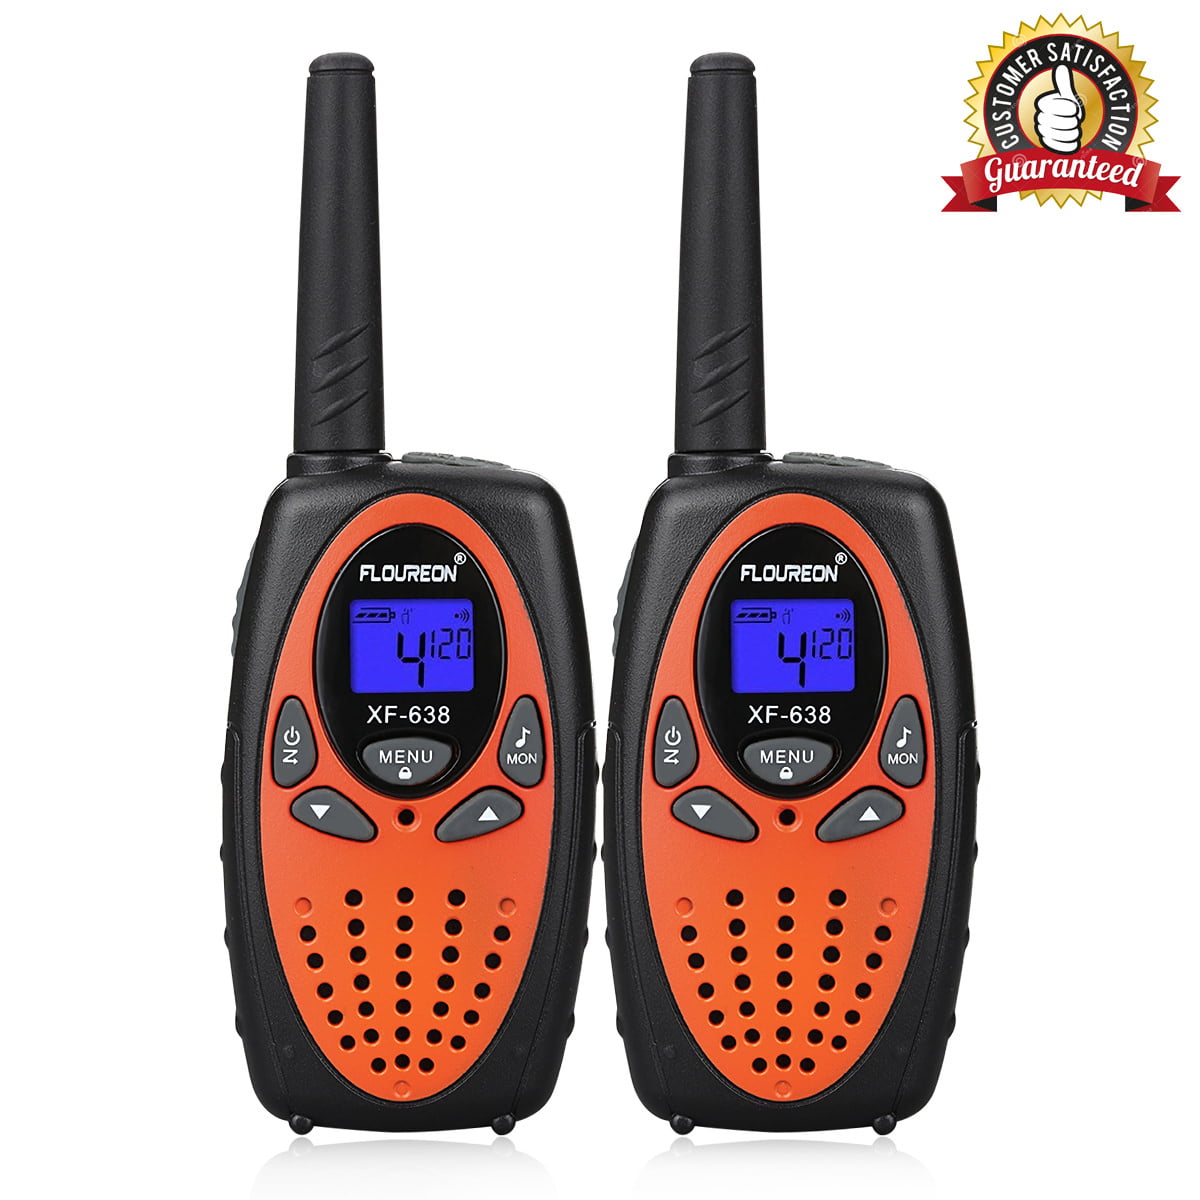 Battery Not Included 2-Way Radio Kids Walkie Talkies with 22 Channels LCD Screen VOX Flashlight 10 Call Tones Ideal Gifts Walky Talky Toy for Children Rose WANFEI 2 x Walkie Talkies for Kids